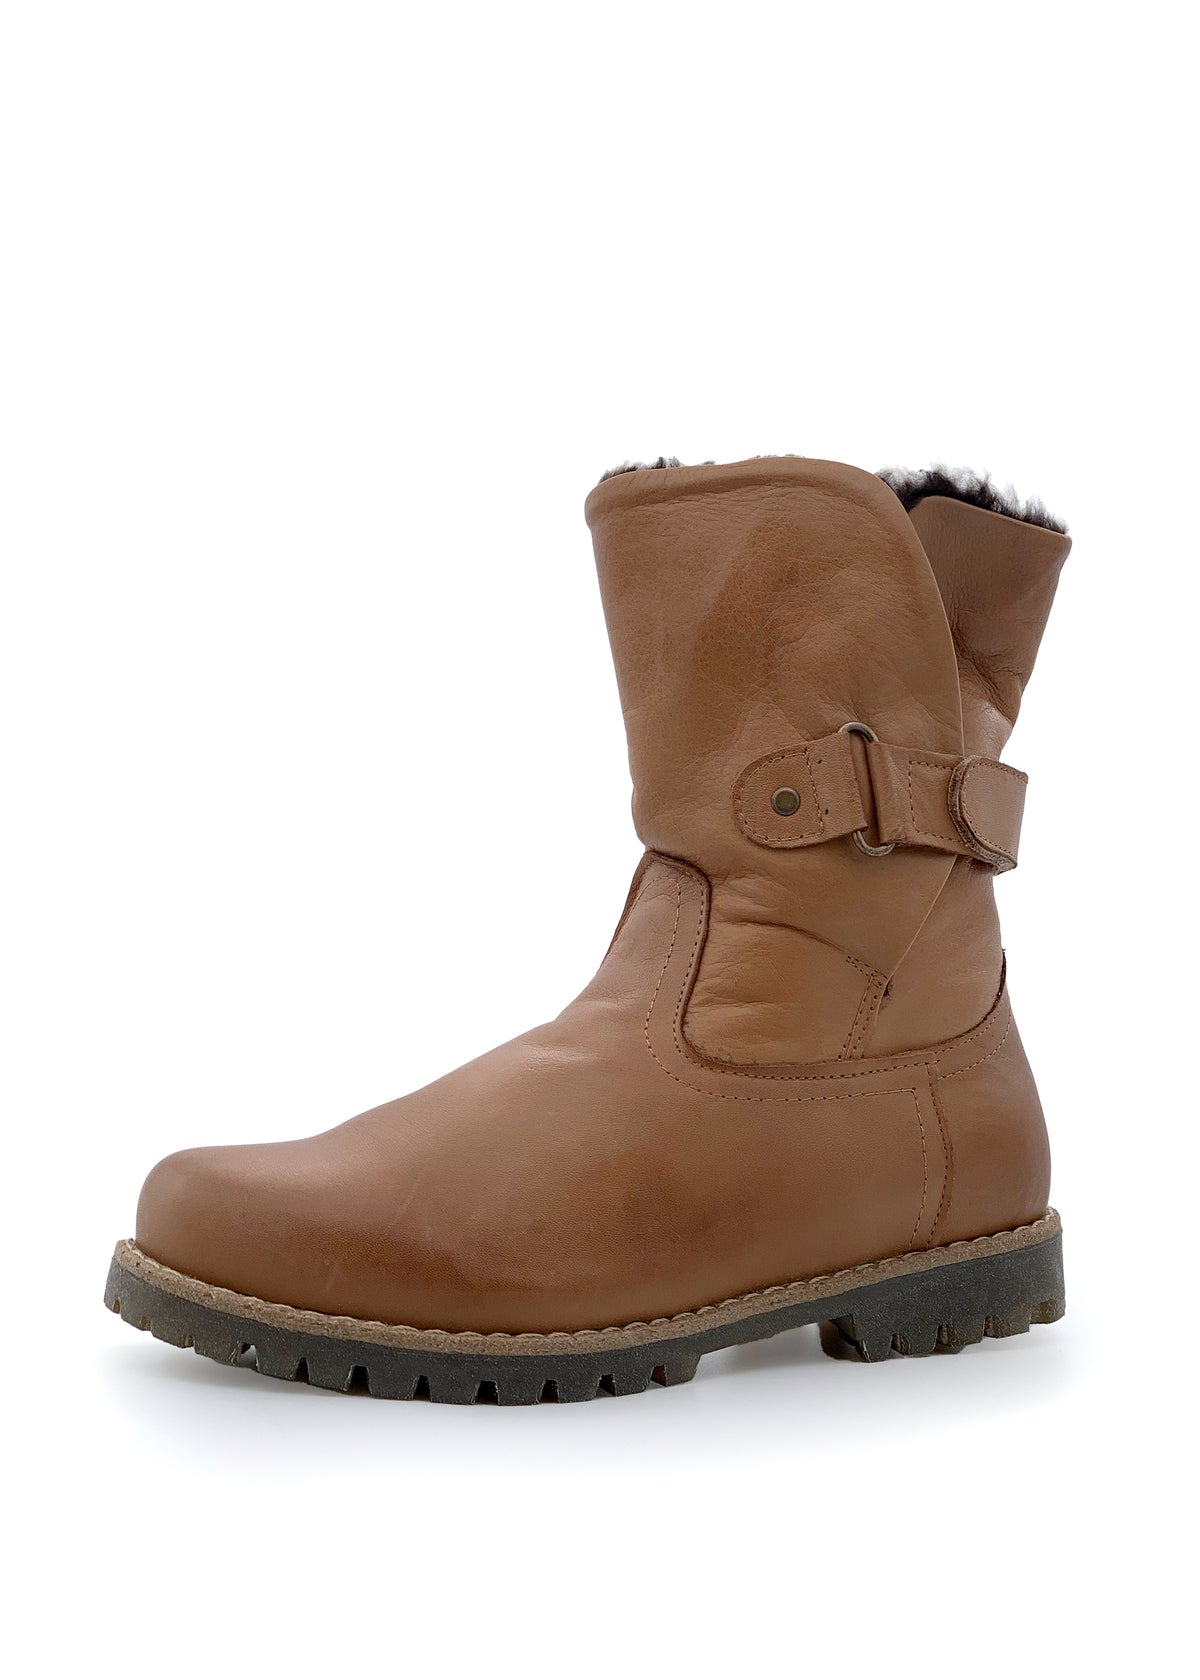 Winter ankle boots - cognac brown